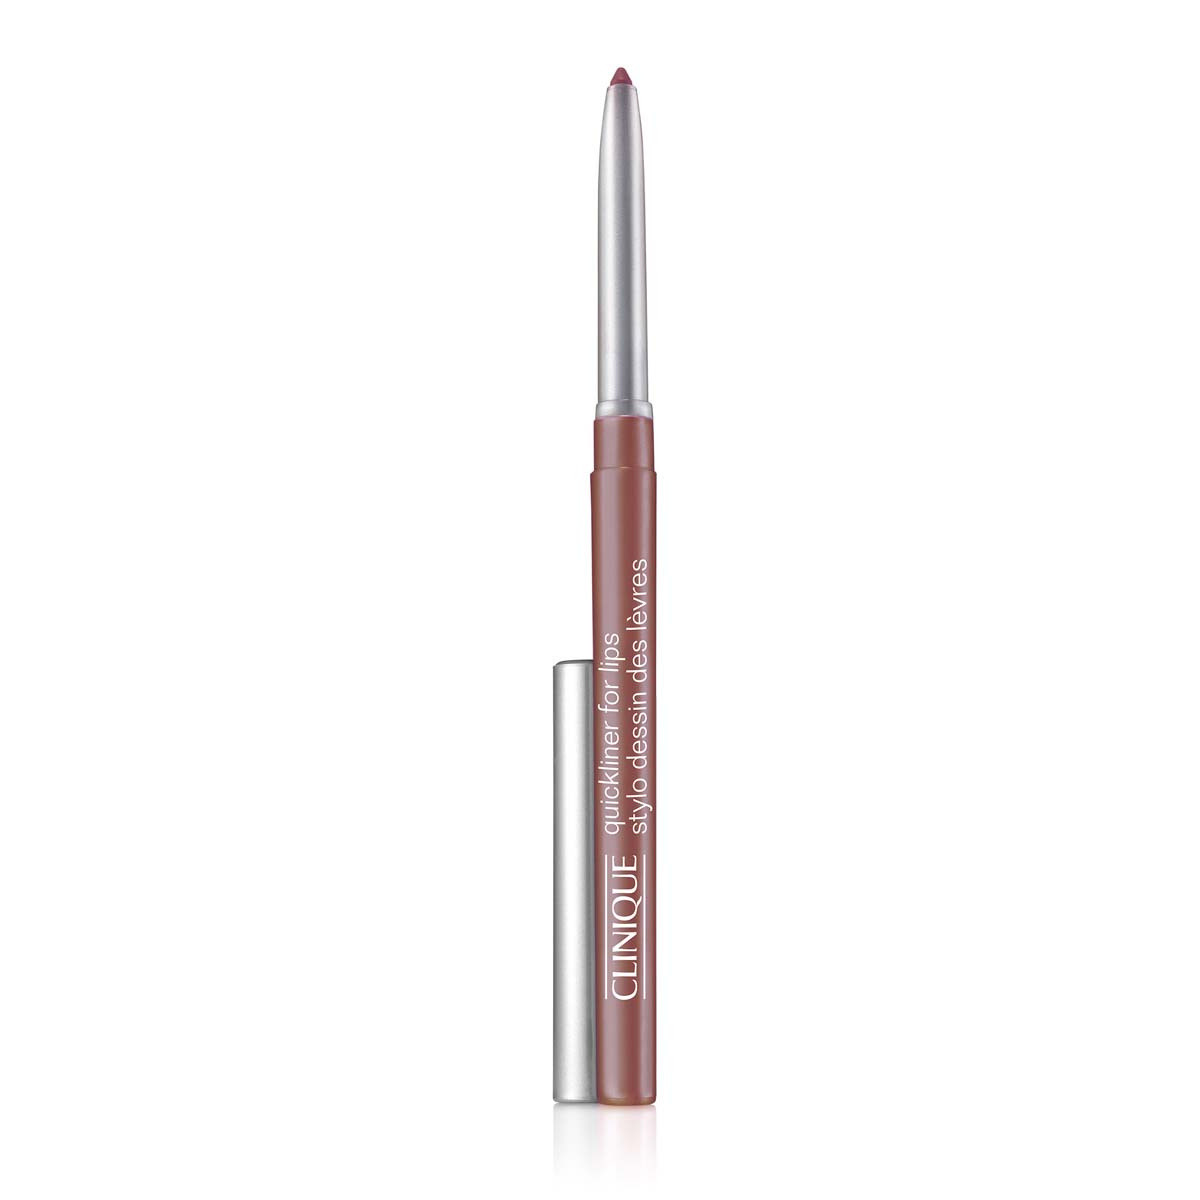 Clinique quicklinerTM for lips - 50 figgy, 50 FIGGY, large image number 0